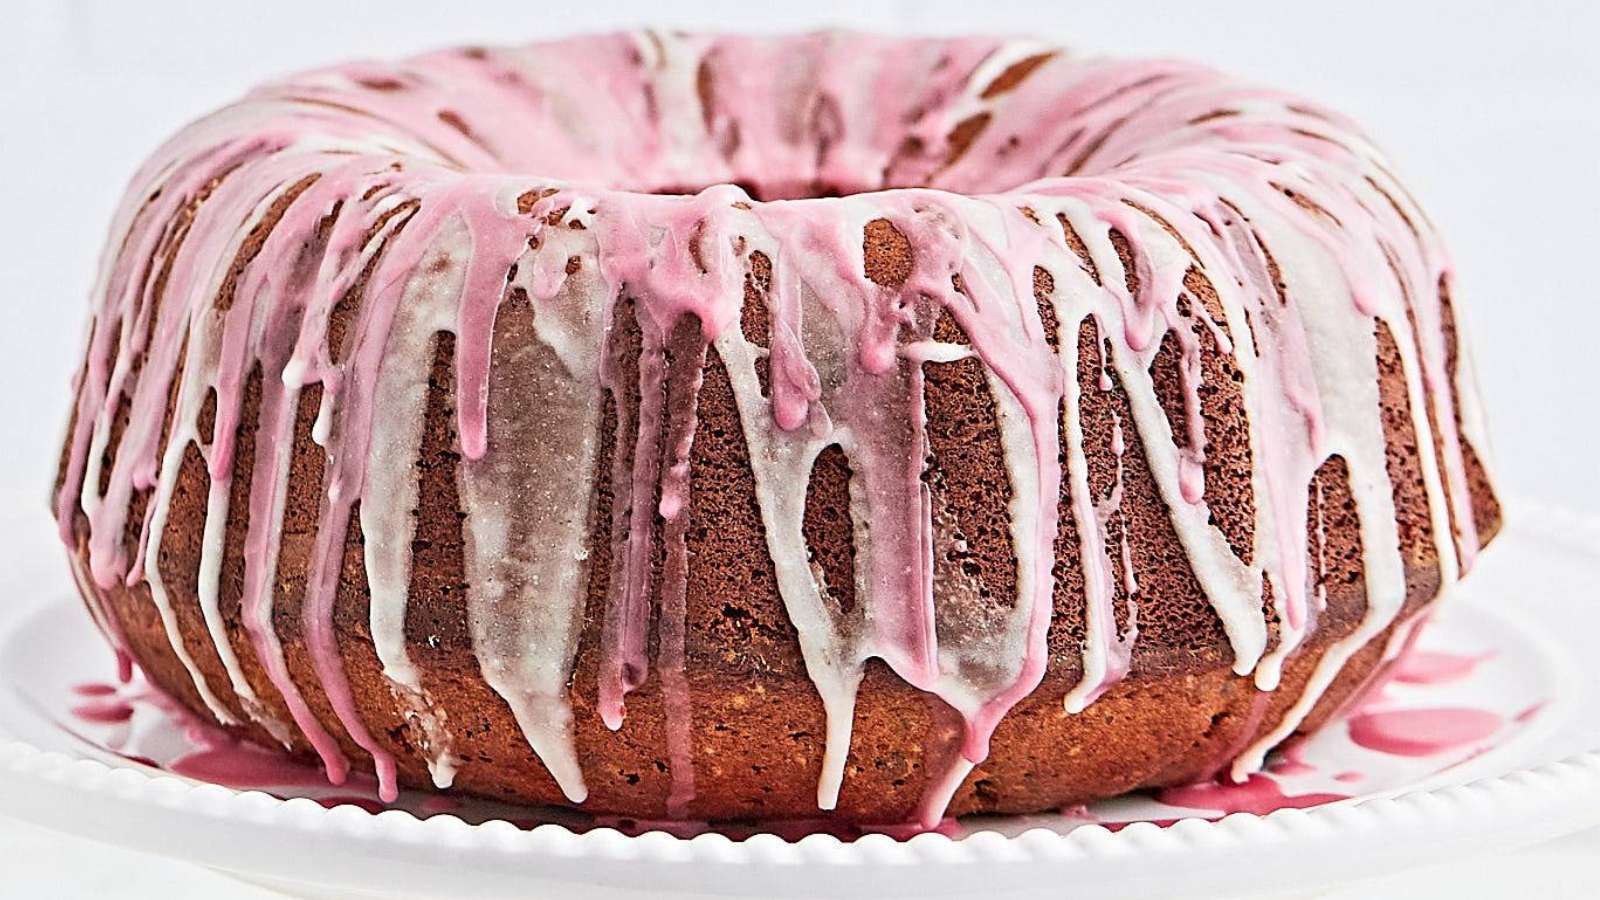 A pink mulled wine bundt cake with icing on top.